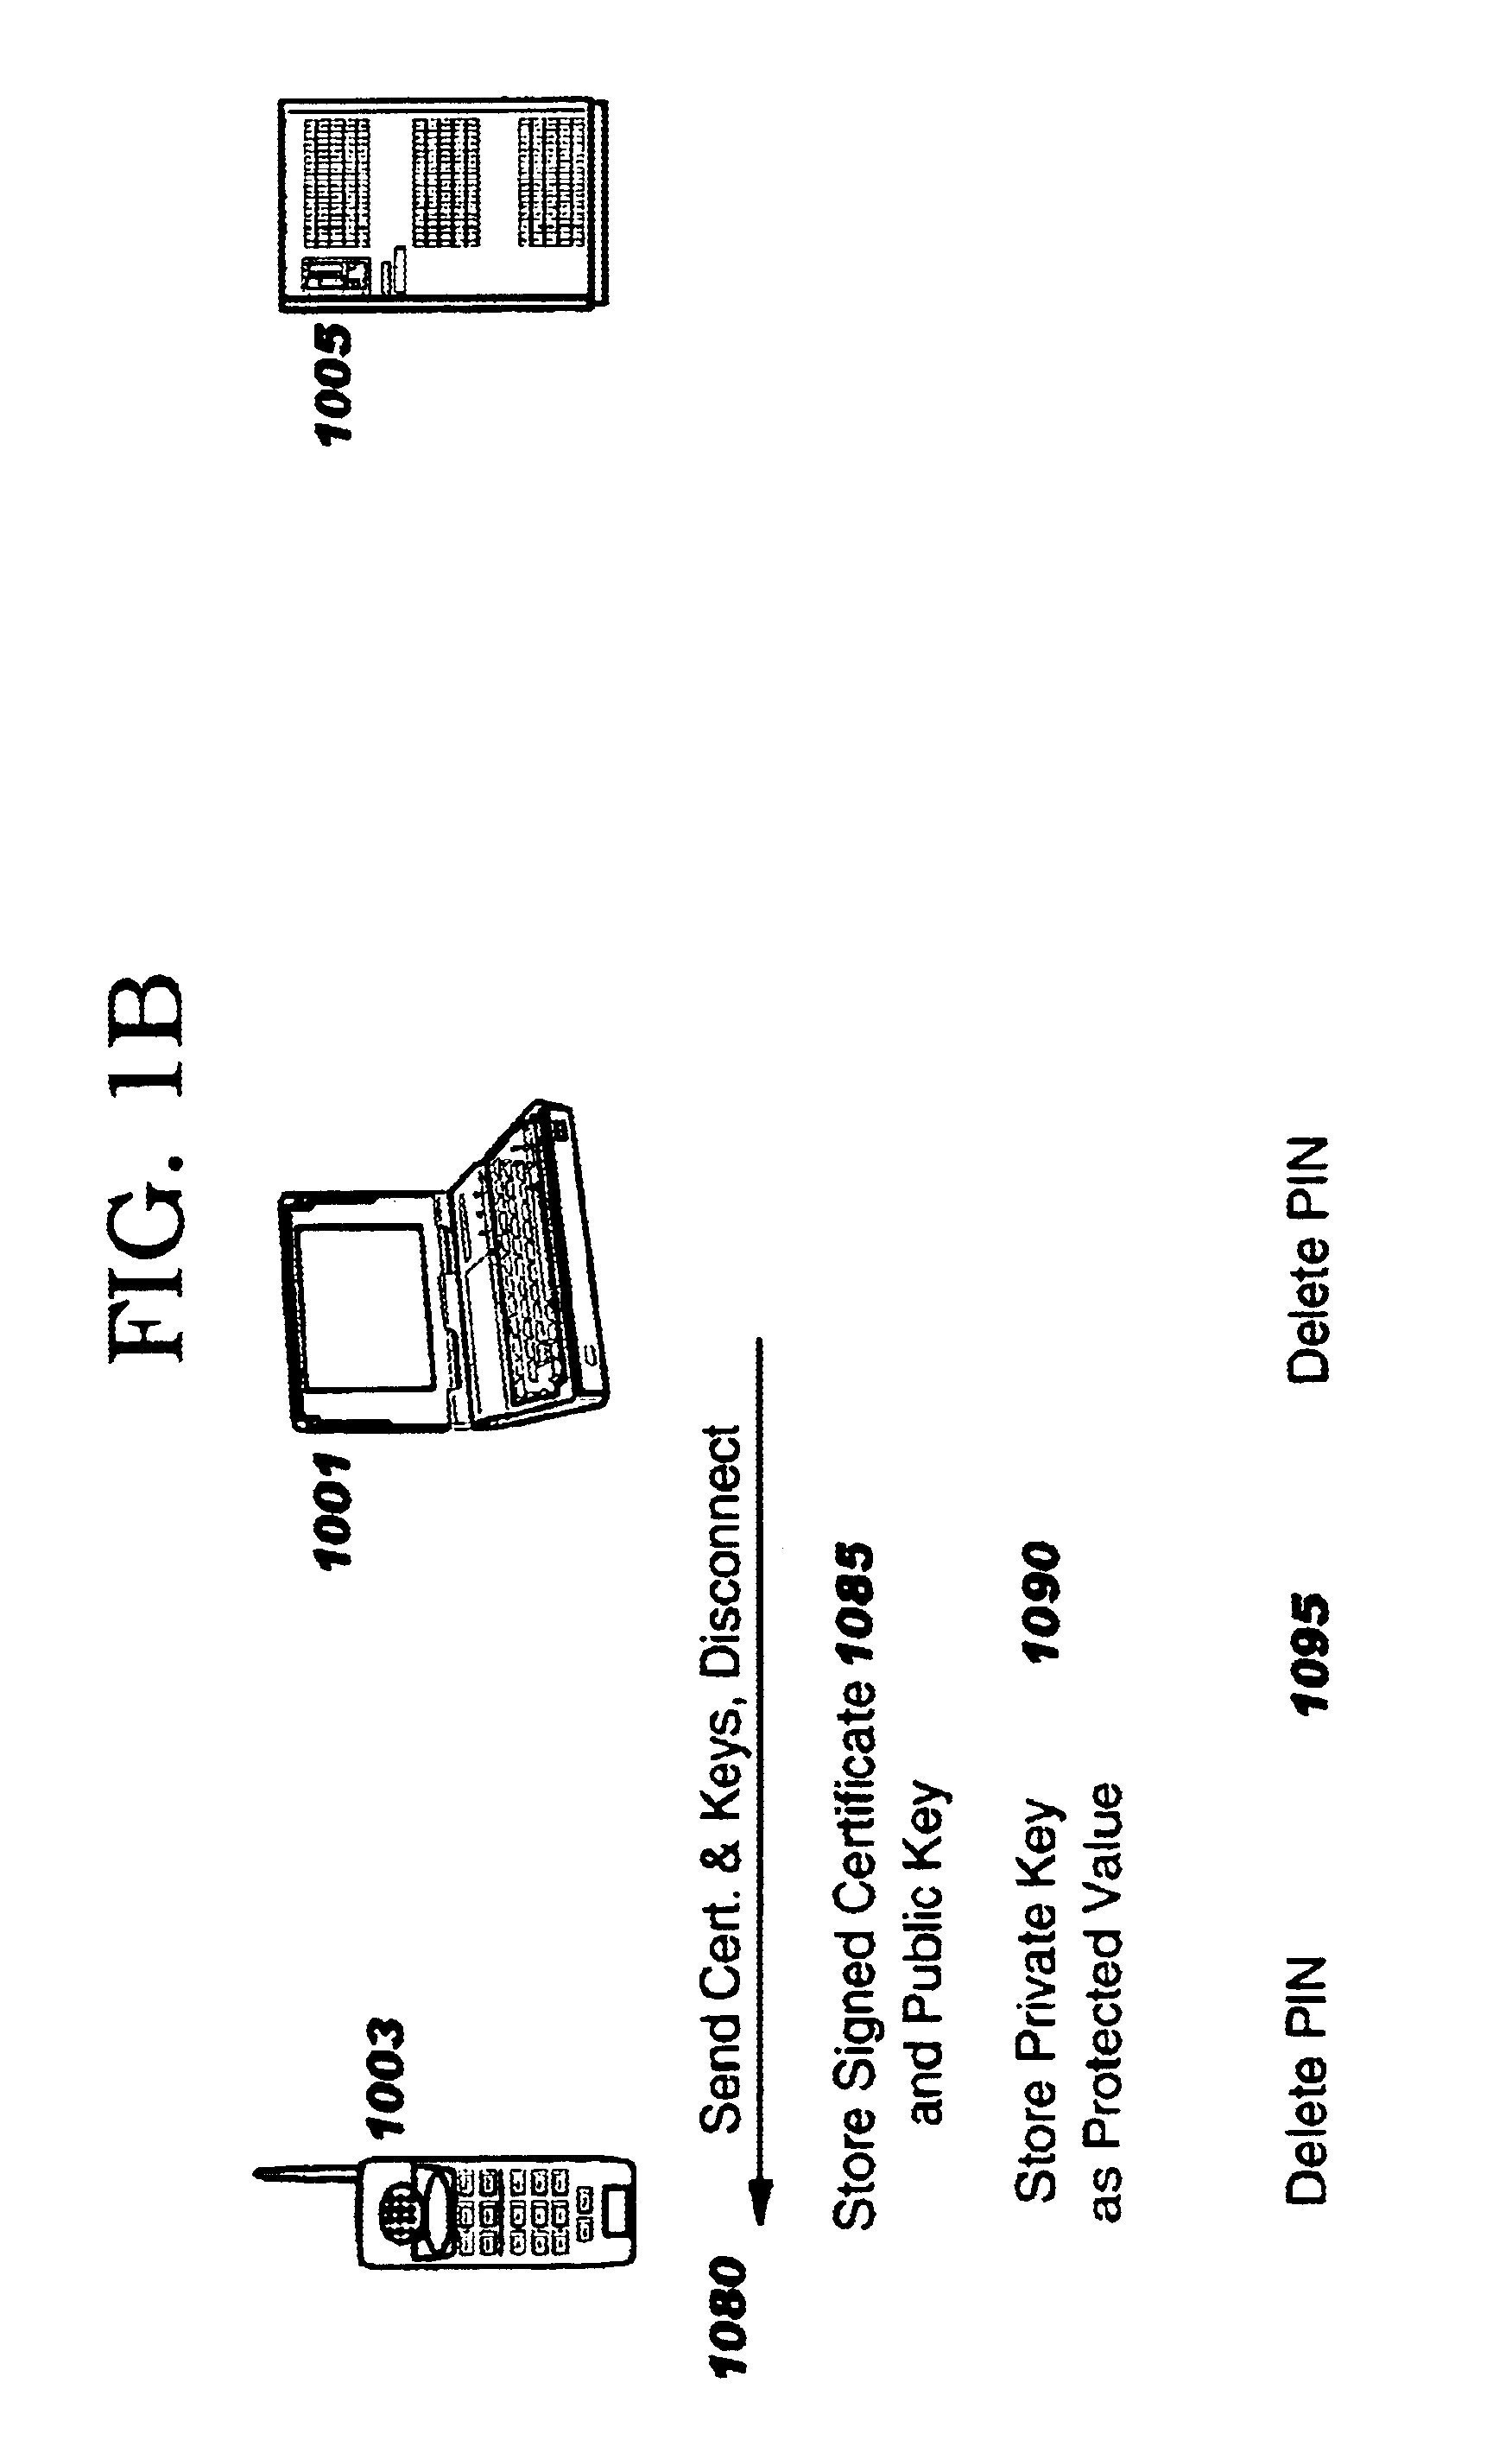 Method and apparatus for efficiently initializing secure communications among wireless devices